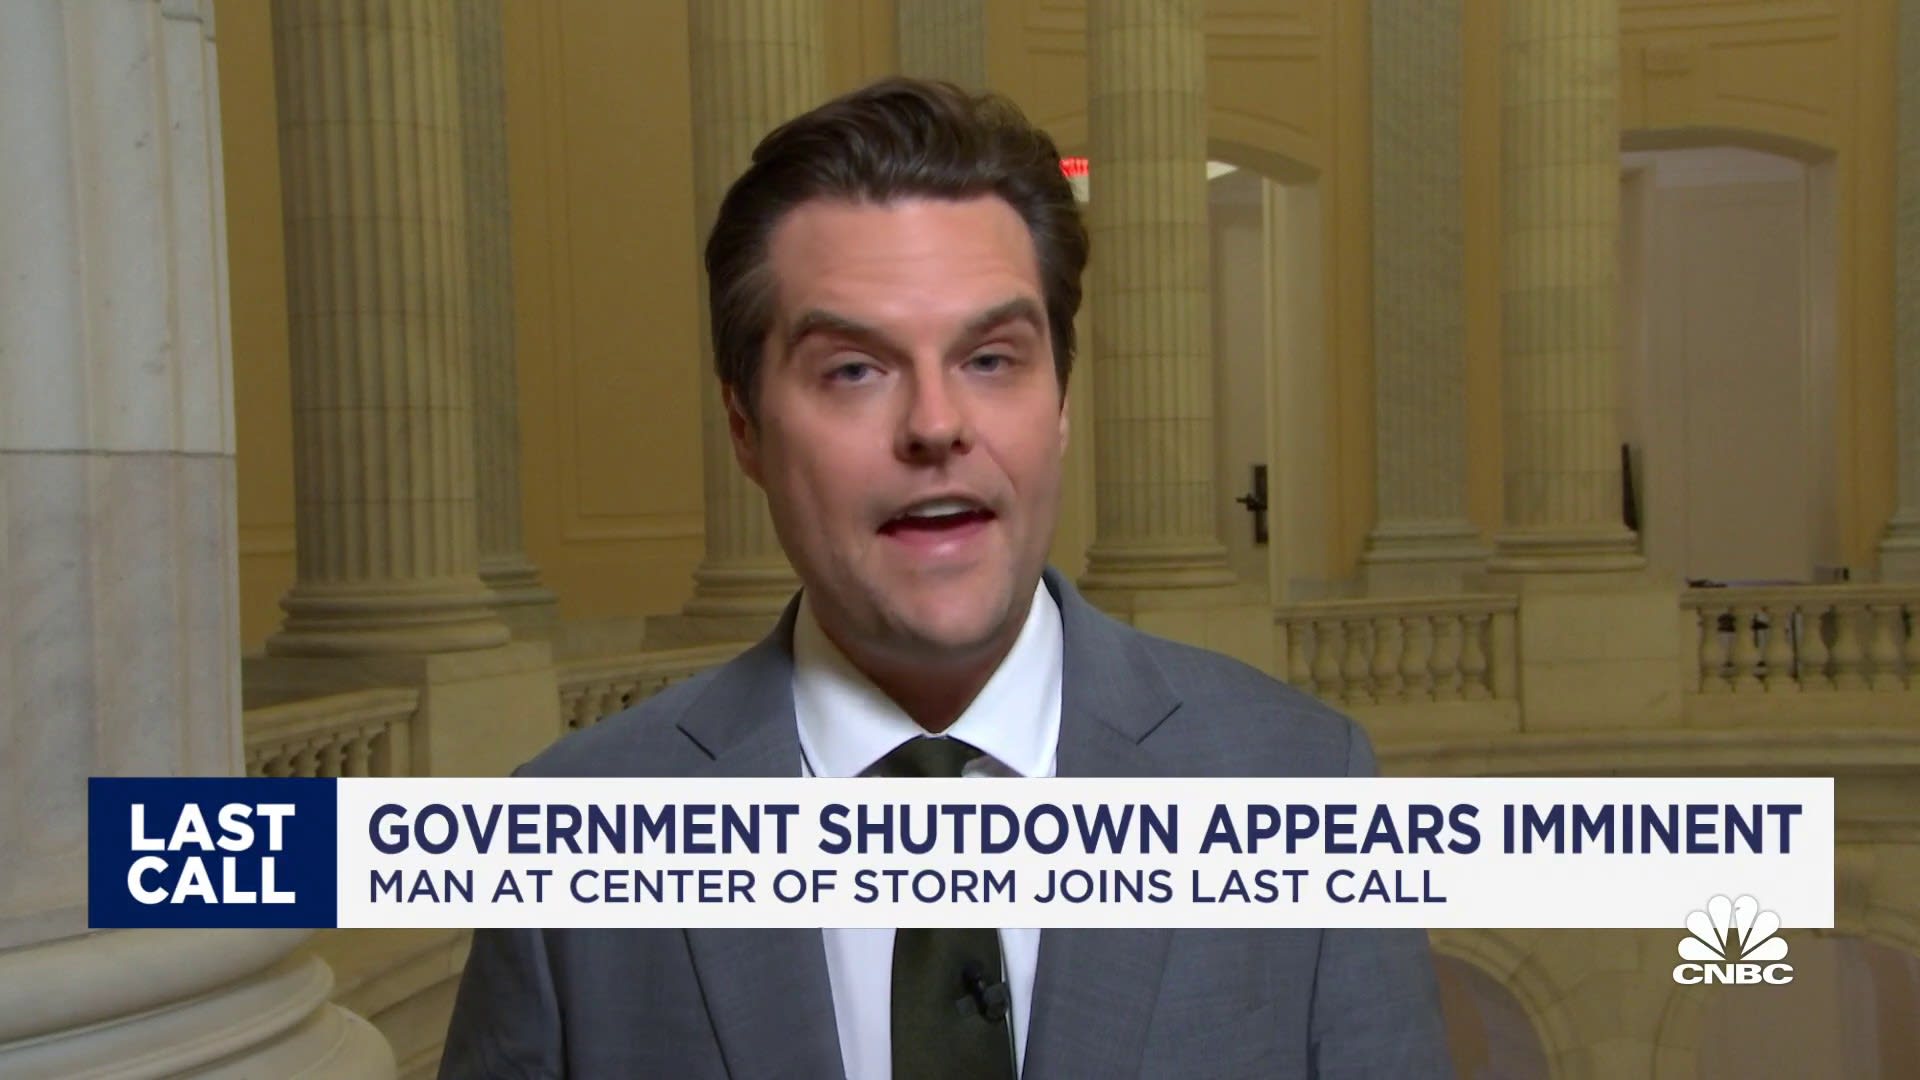 Rep. Matt Gaetz: The continuing resolution way of governing is a 'fever dream'